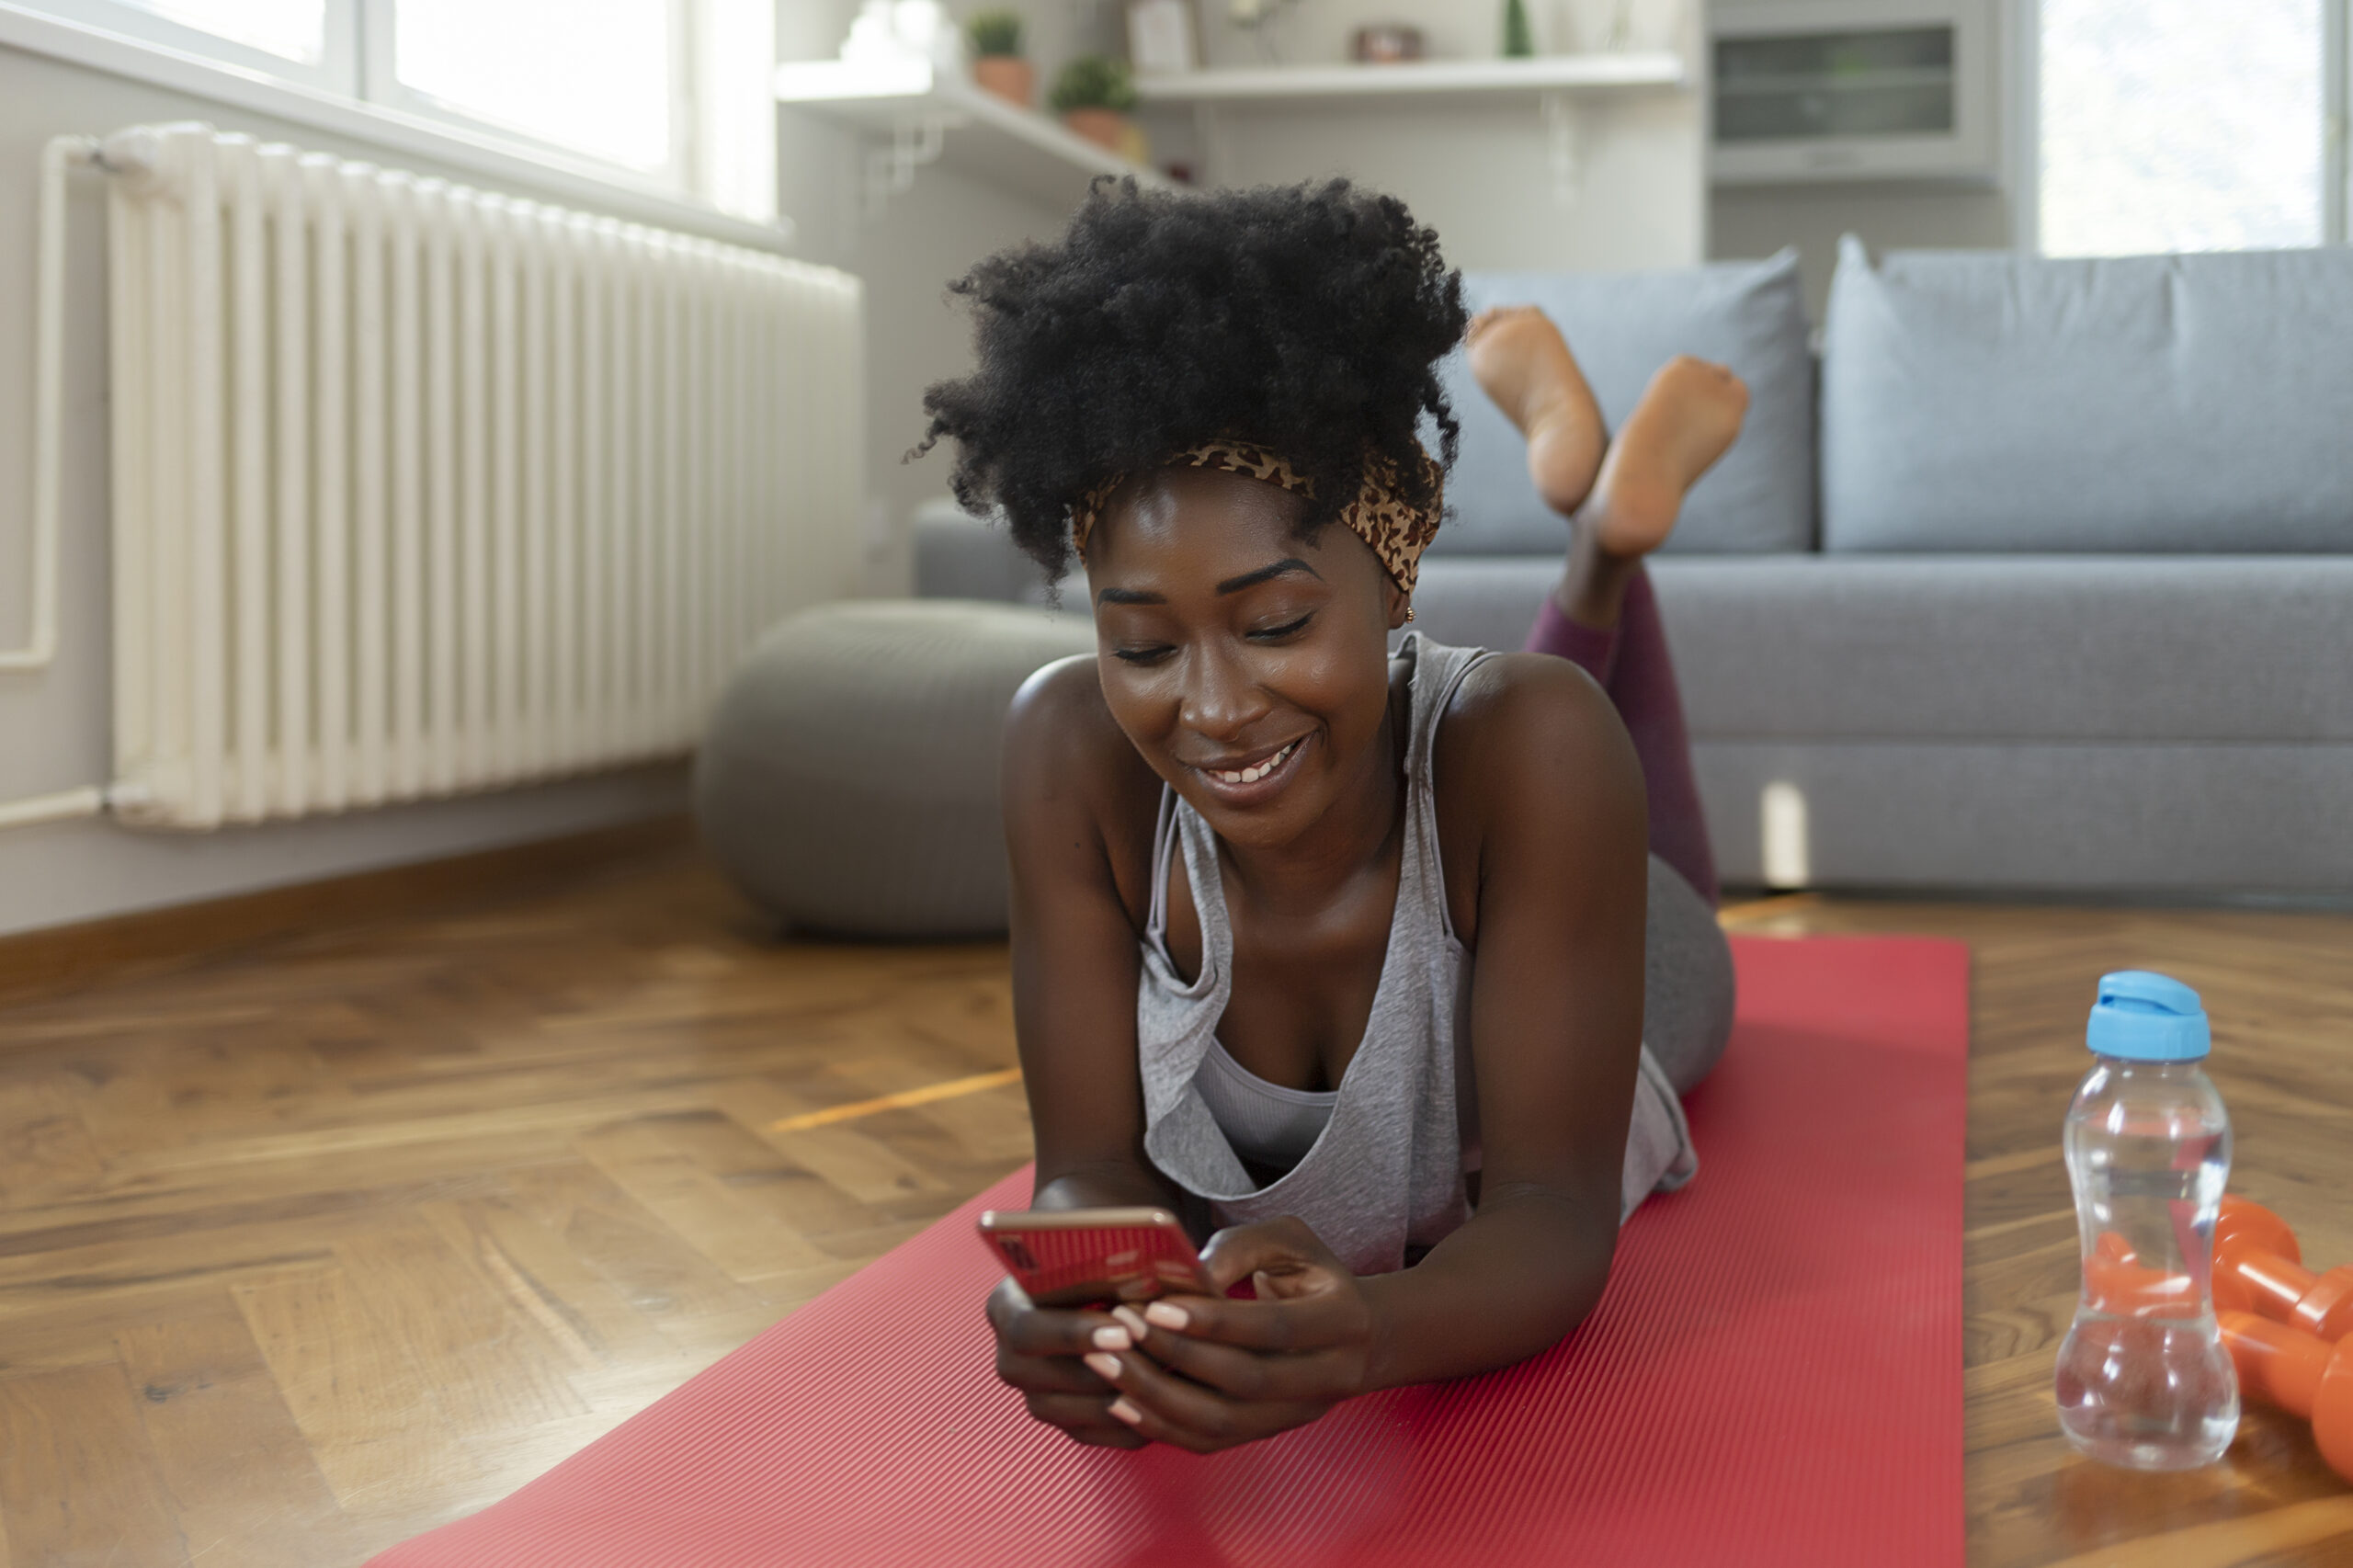 Beyond Instagram: How To Stay Consistent Beyond Trendy Online Workouts